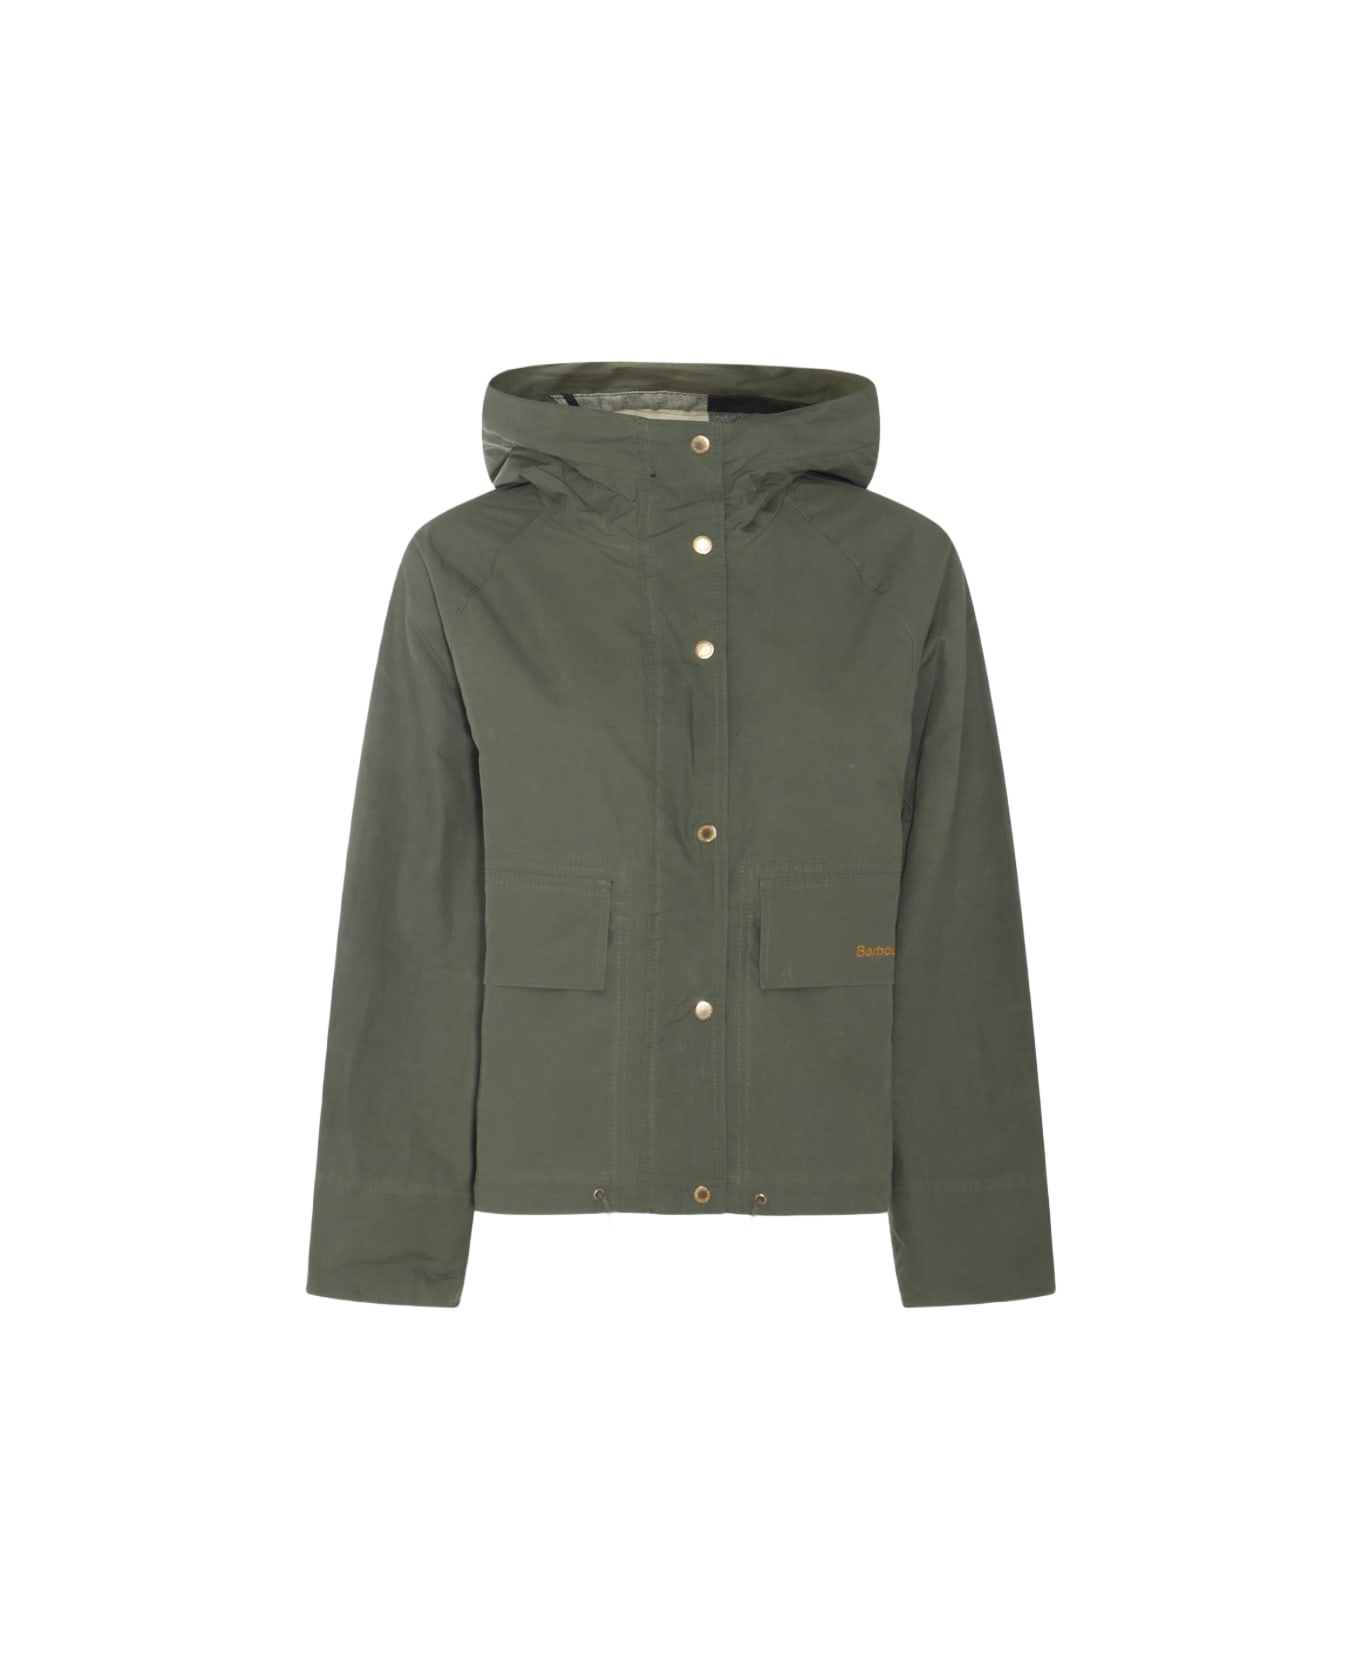 Barbour Army Cotton Casual Jacket - ARMY GREEN